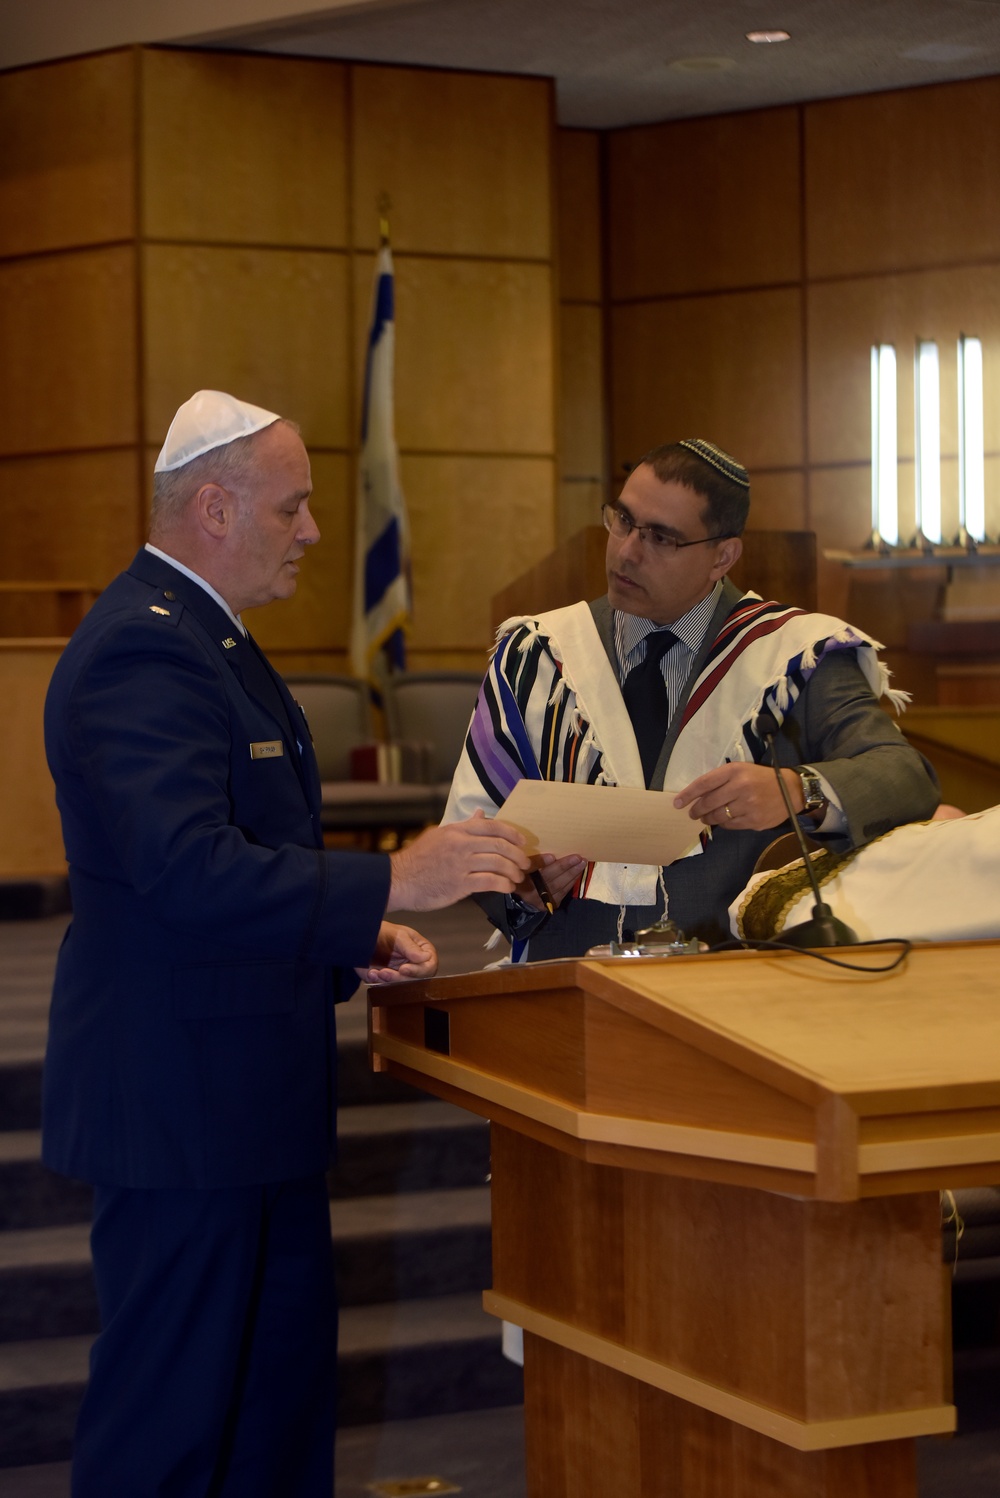 A gift from the Jewish community to Whiteman AFB